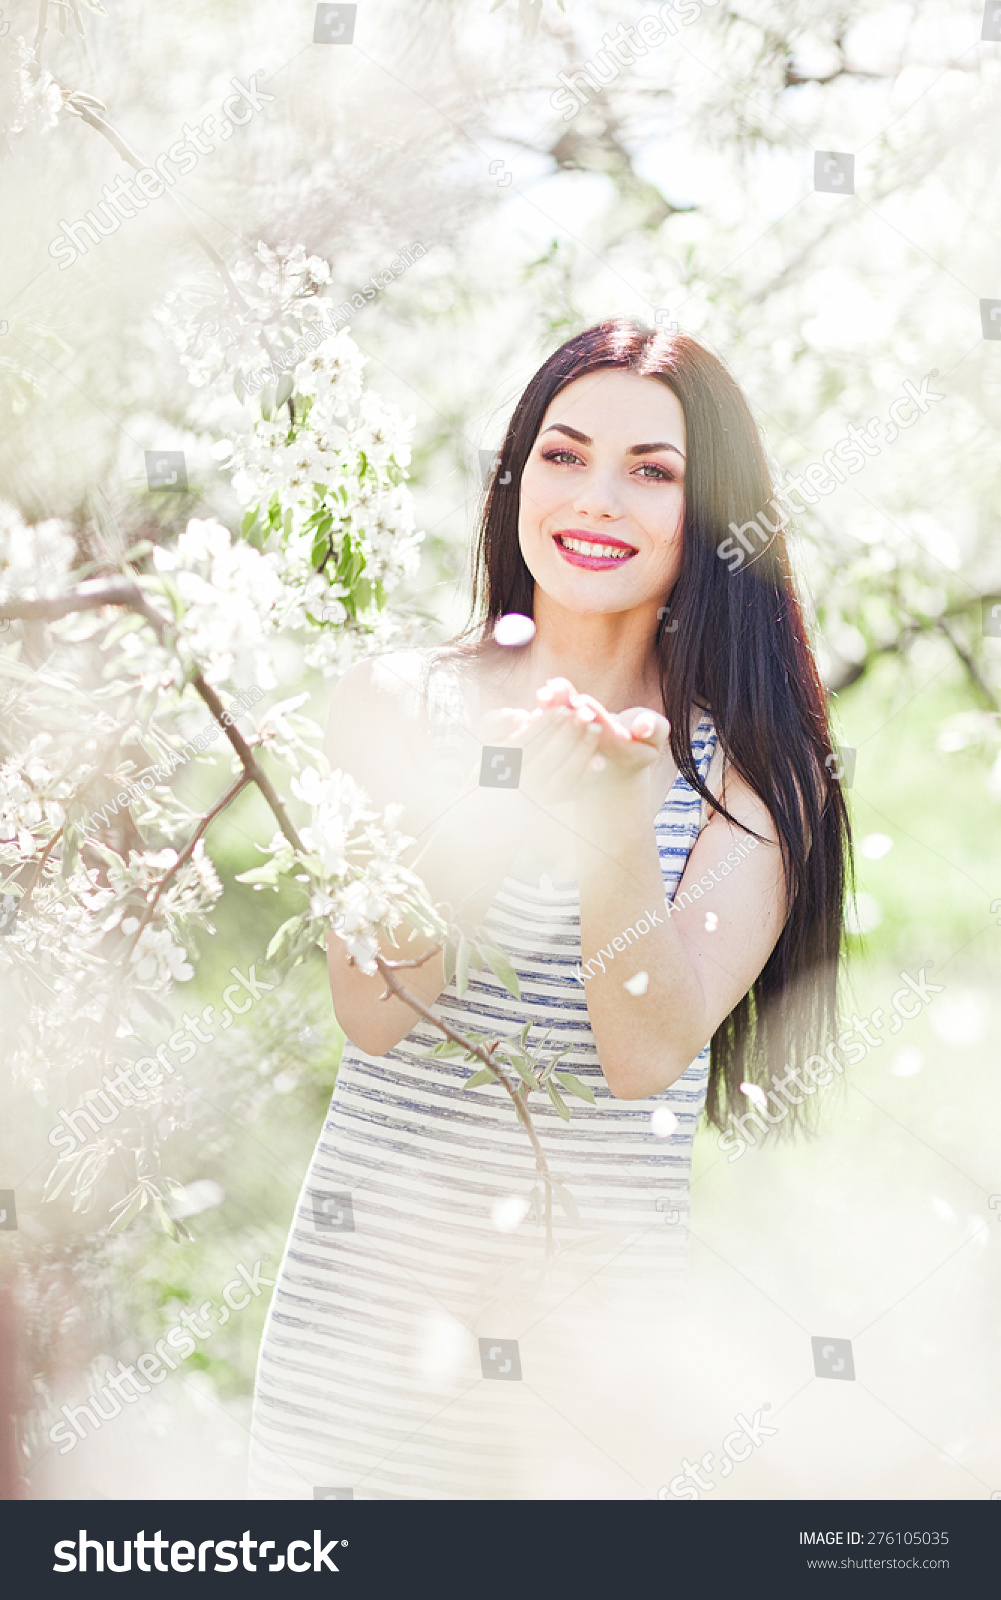 portrait of young lovely woman in spring flowers #276105035